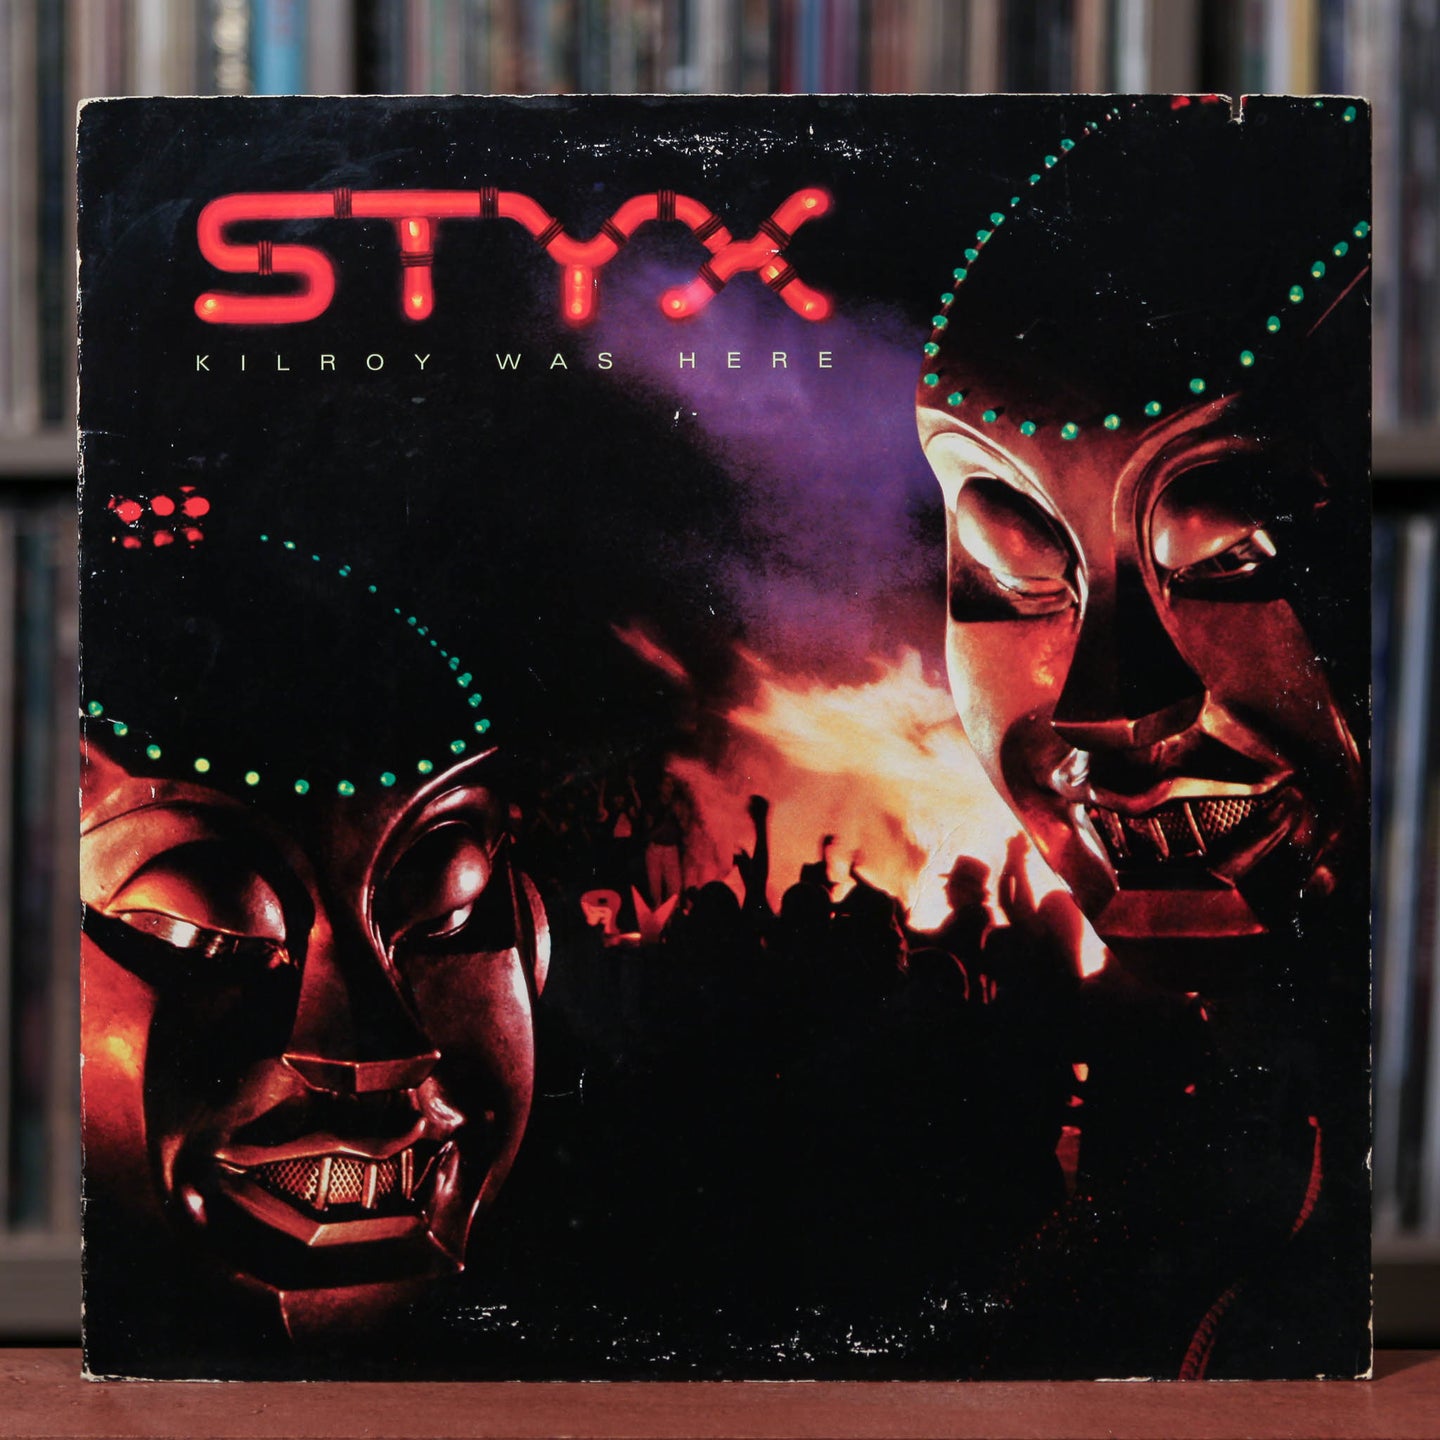 Styx - Kilroy Was Here - 1983 A&M, VG/VG+